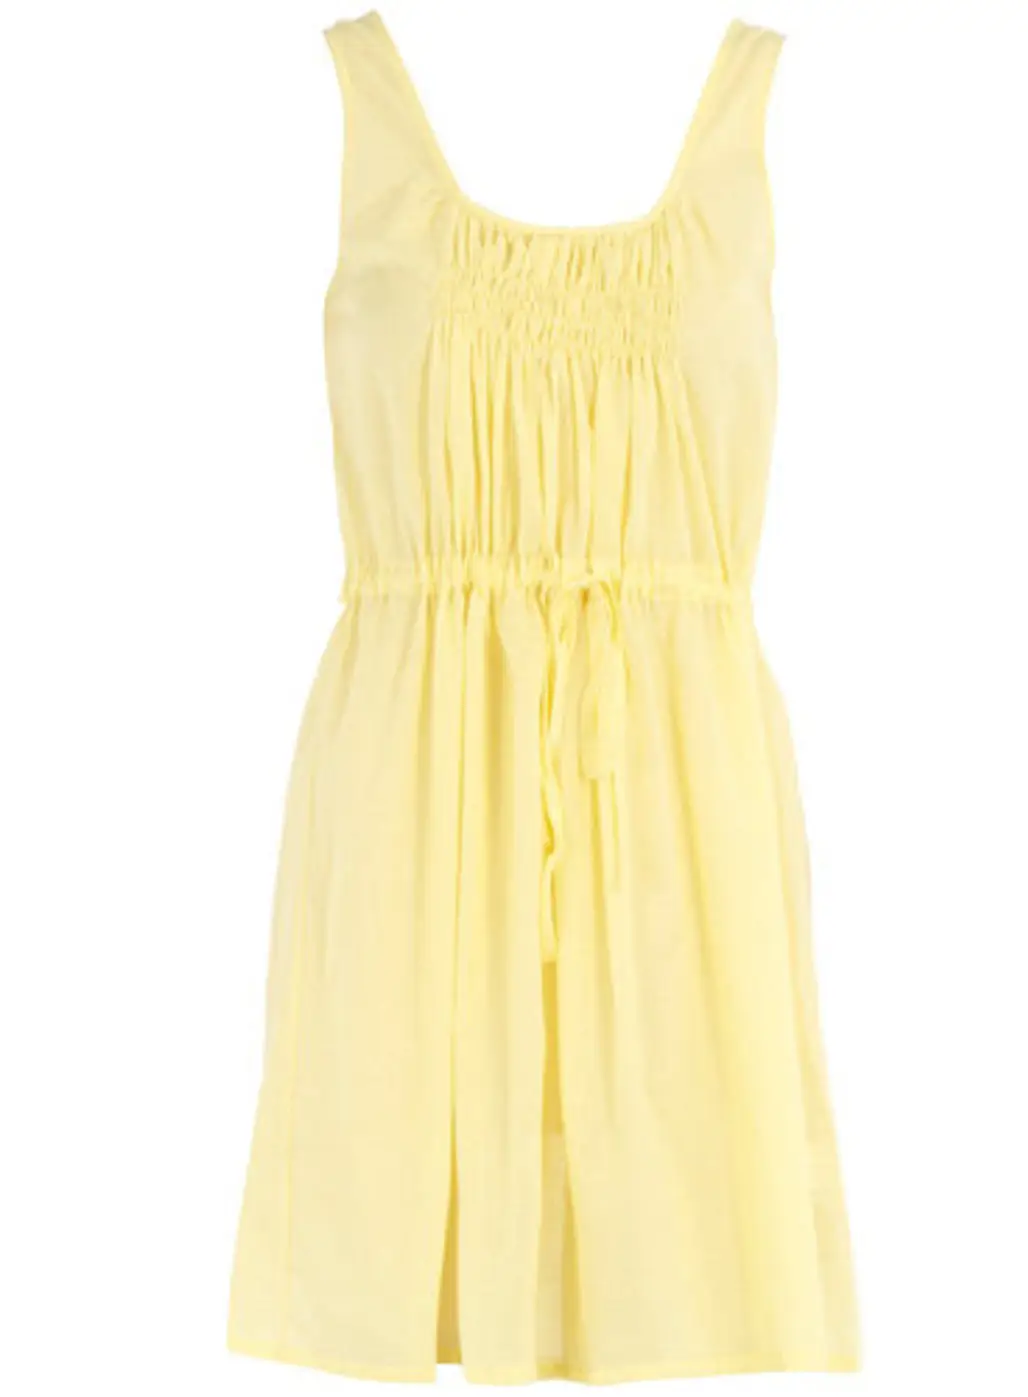 Dorothy Perkins Yellow Ruched Front Dress